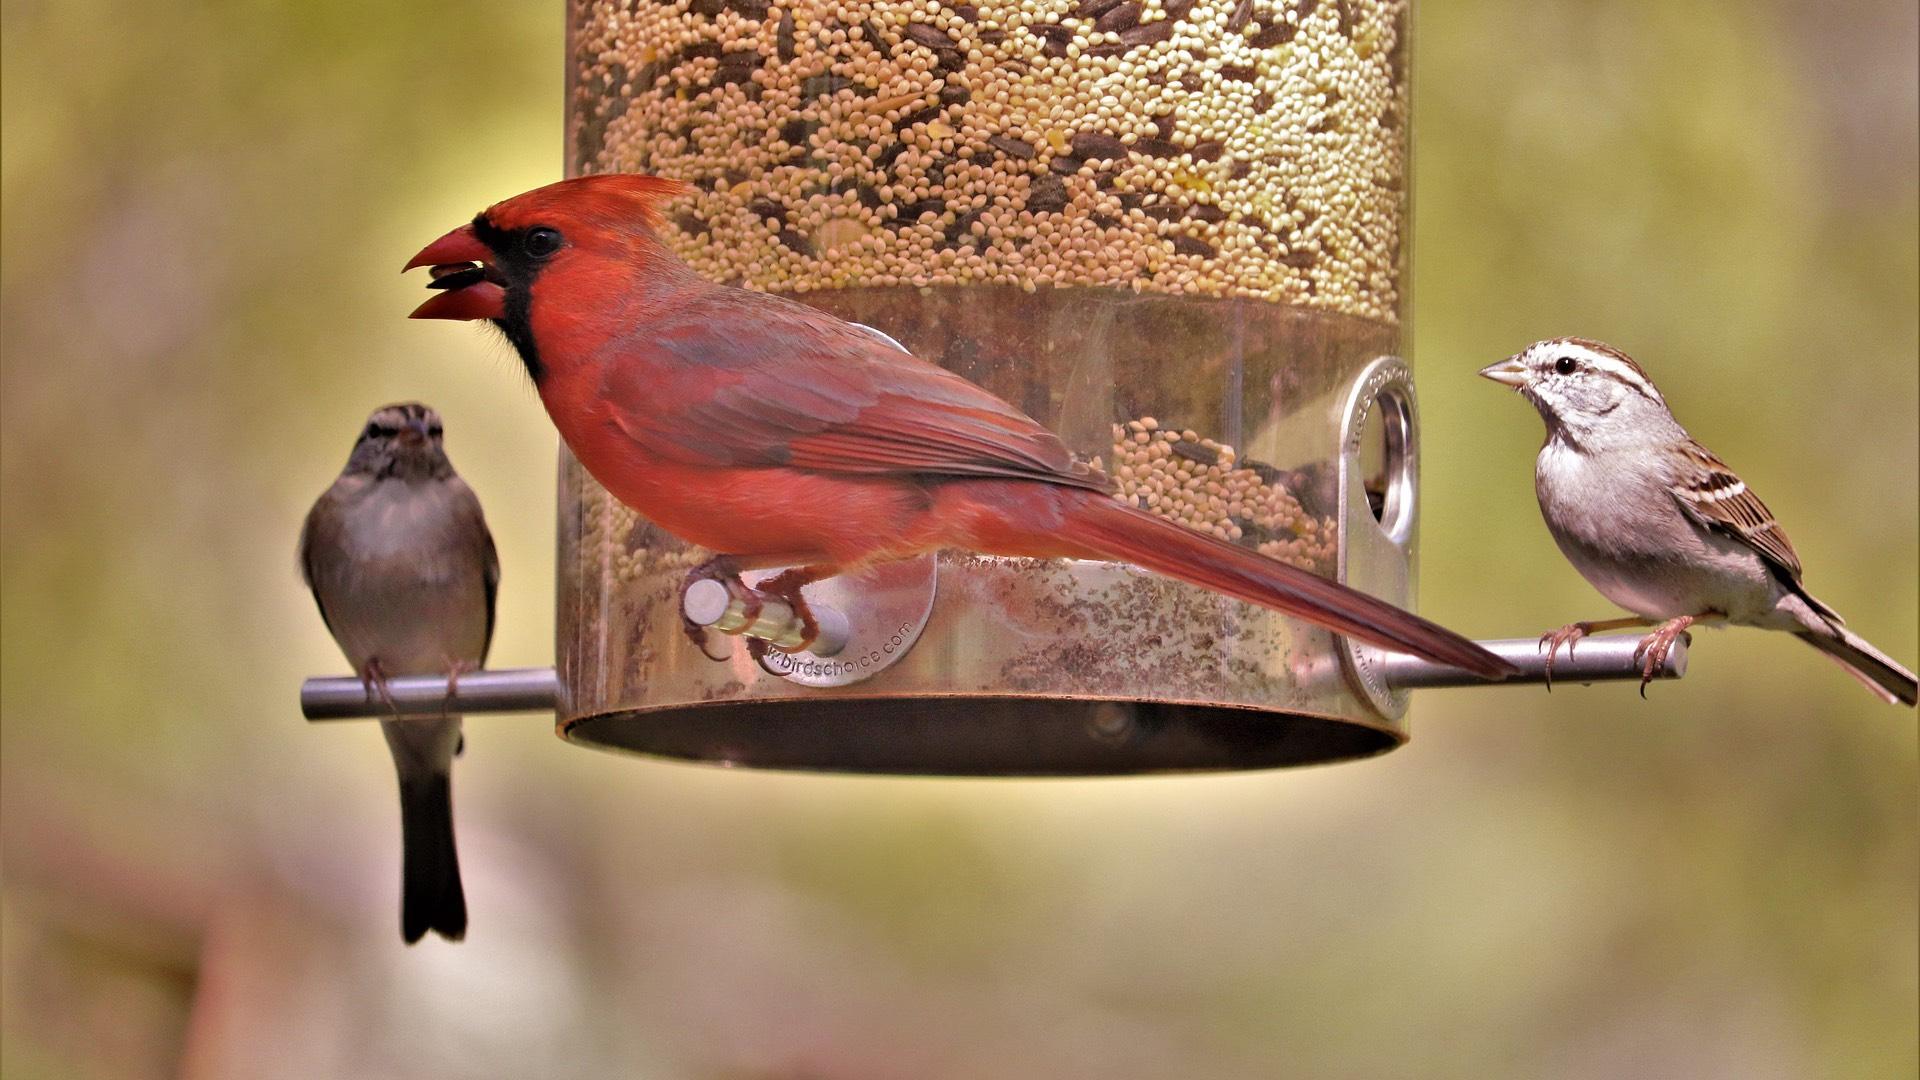 It's OK to have bird feeders and baths in outdoor spaces, wildlife officials said, but be sure to keep them clean. (Pixabay / GeorgeB2)